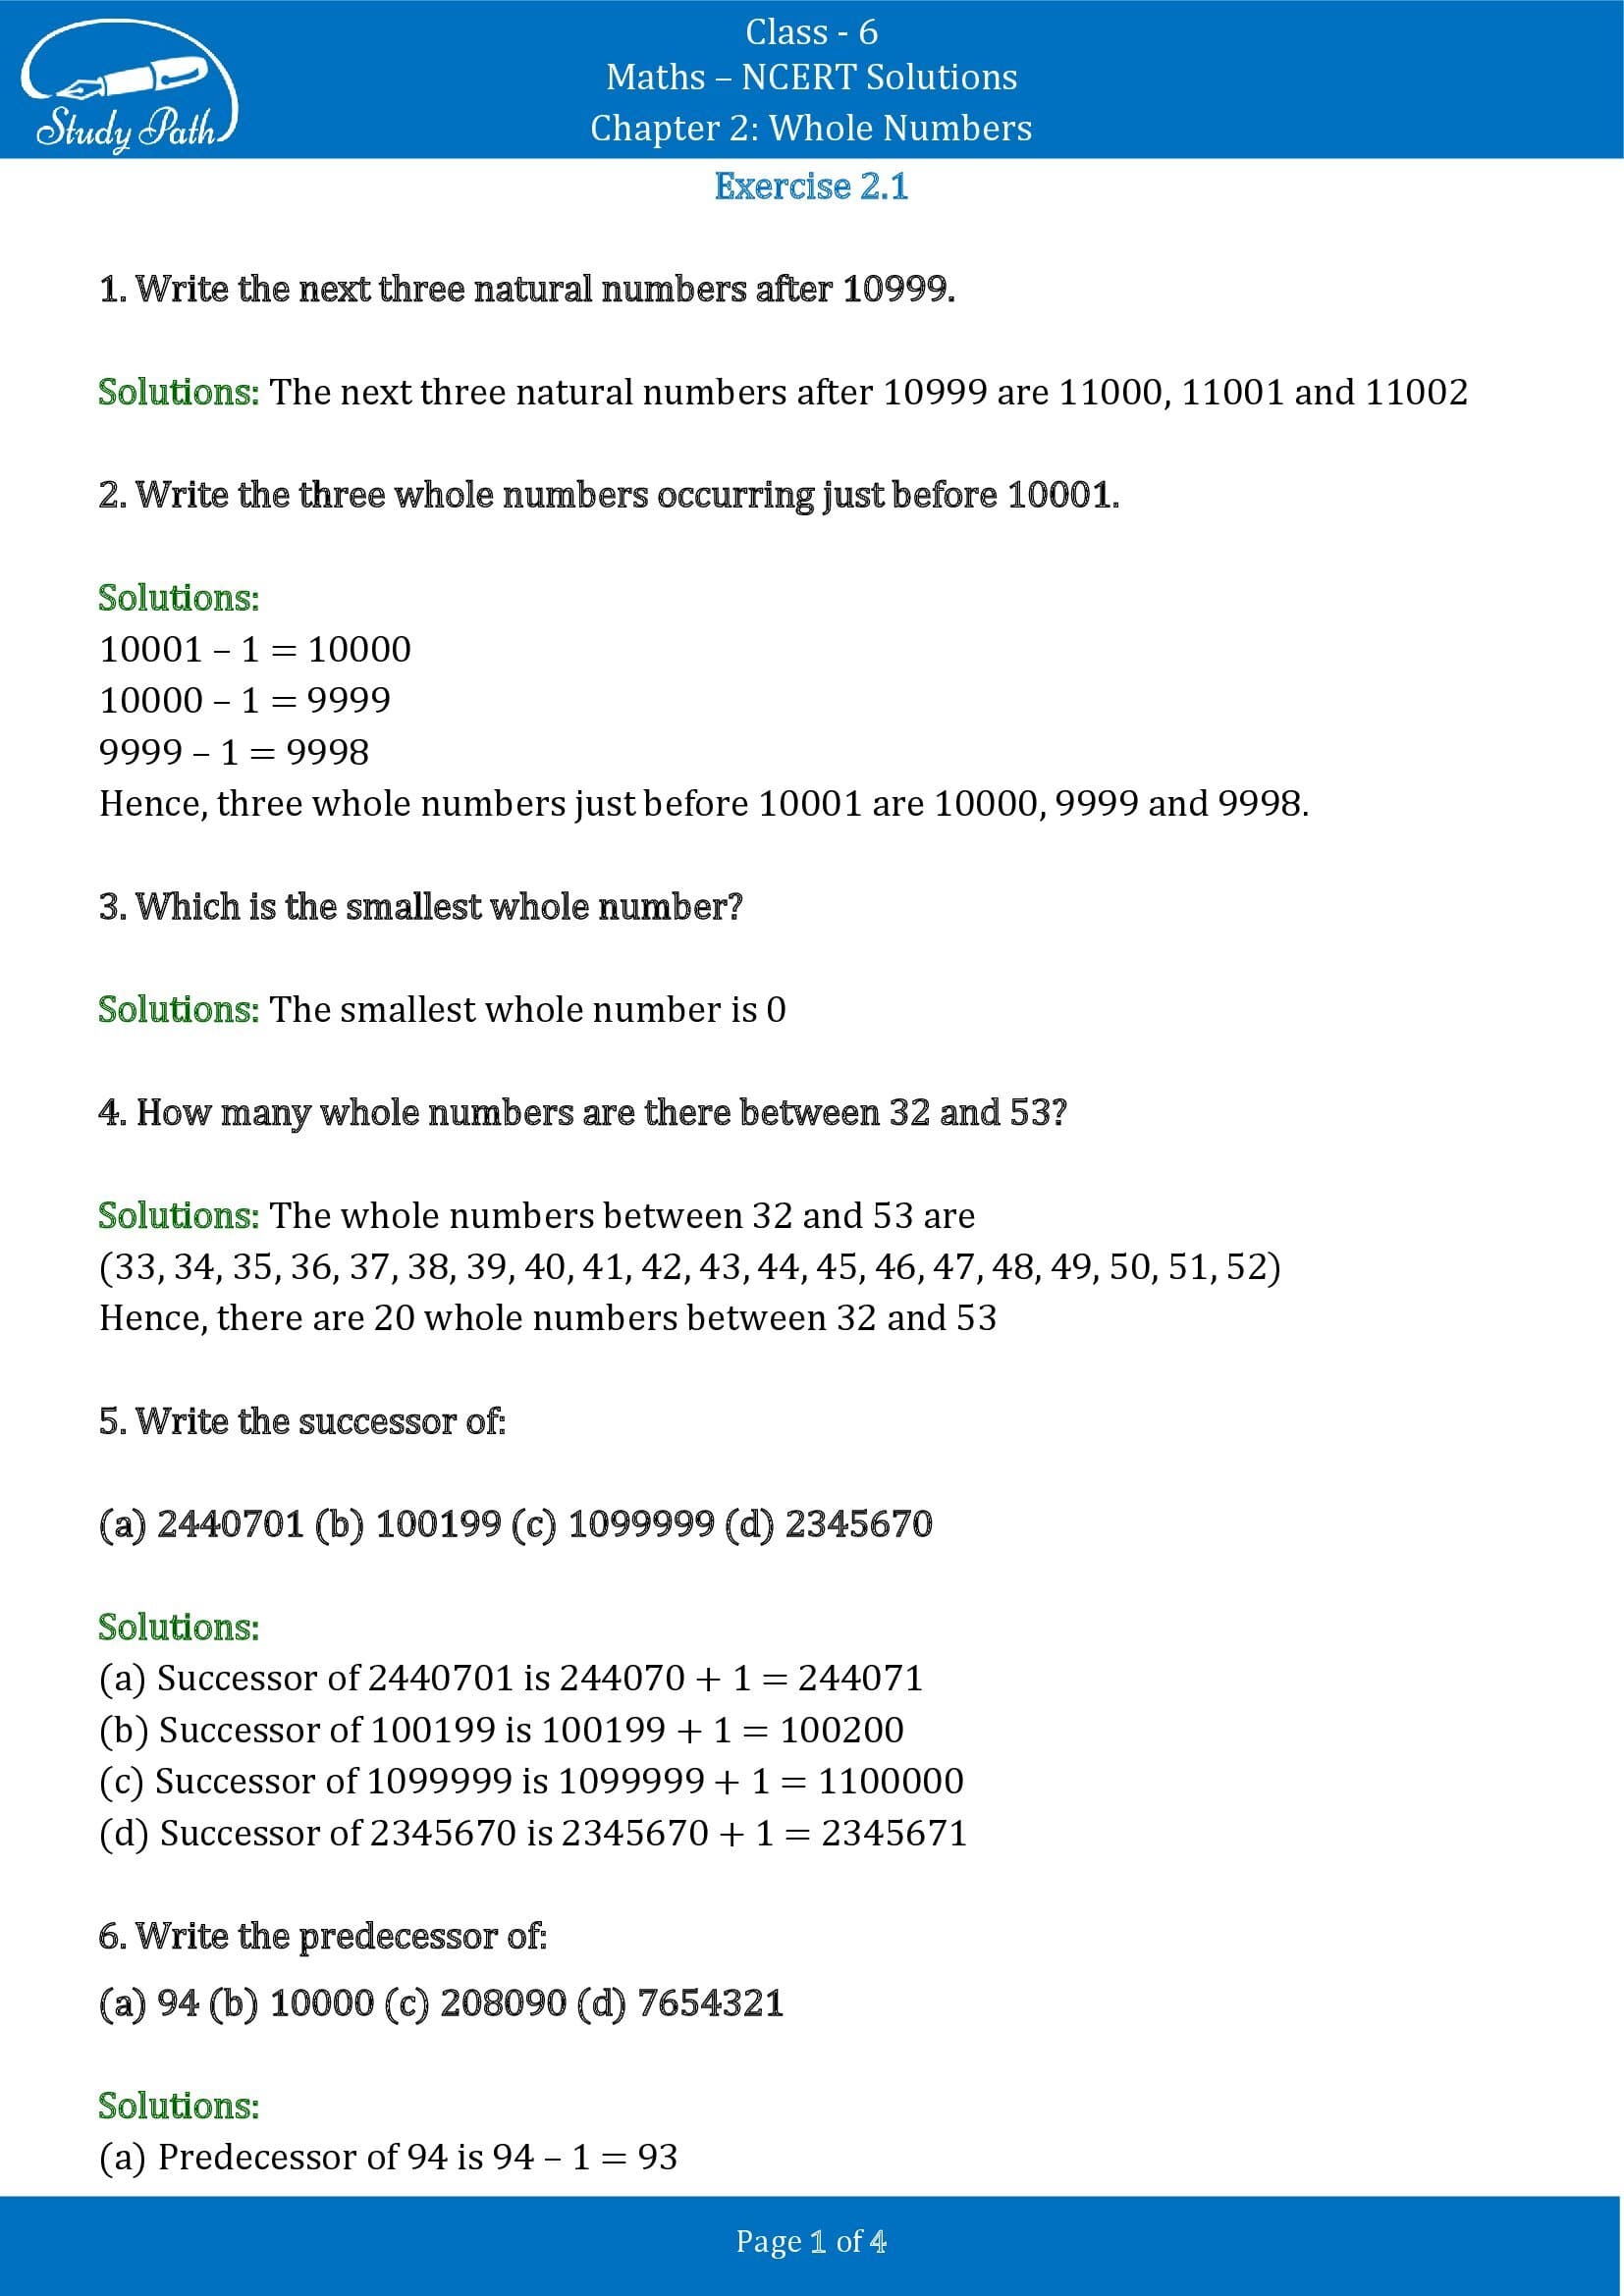 NCERT Solutions for Class 6 Maths Chapter 2 Whole Numbers Exercise 2.1 00001